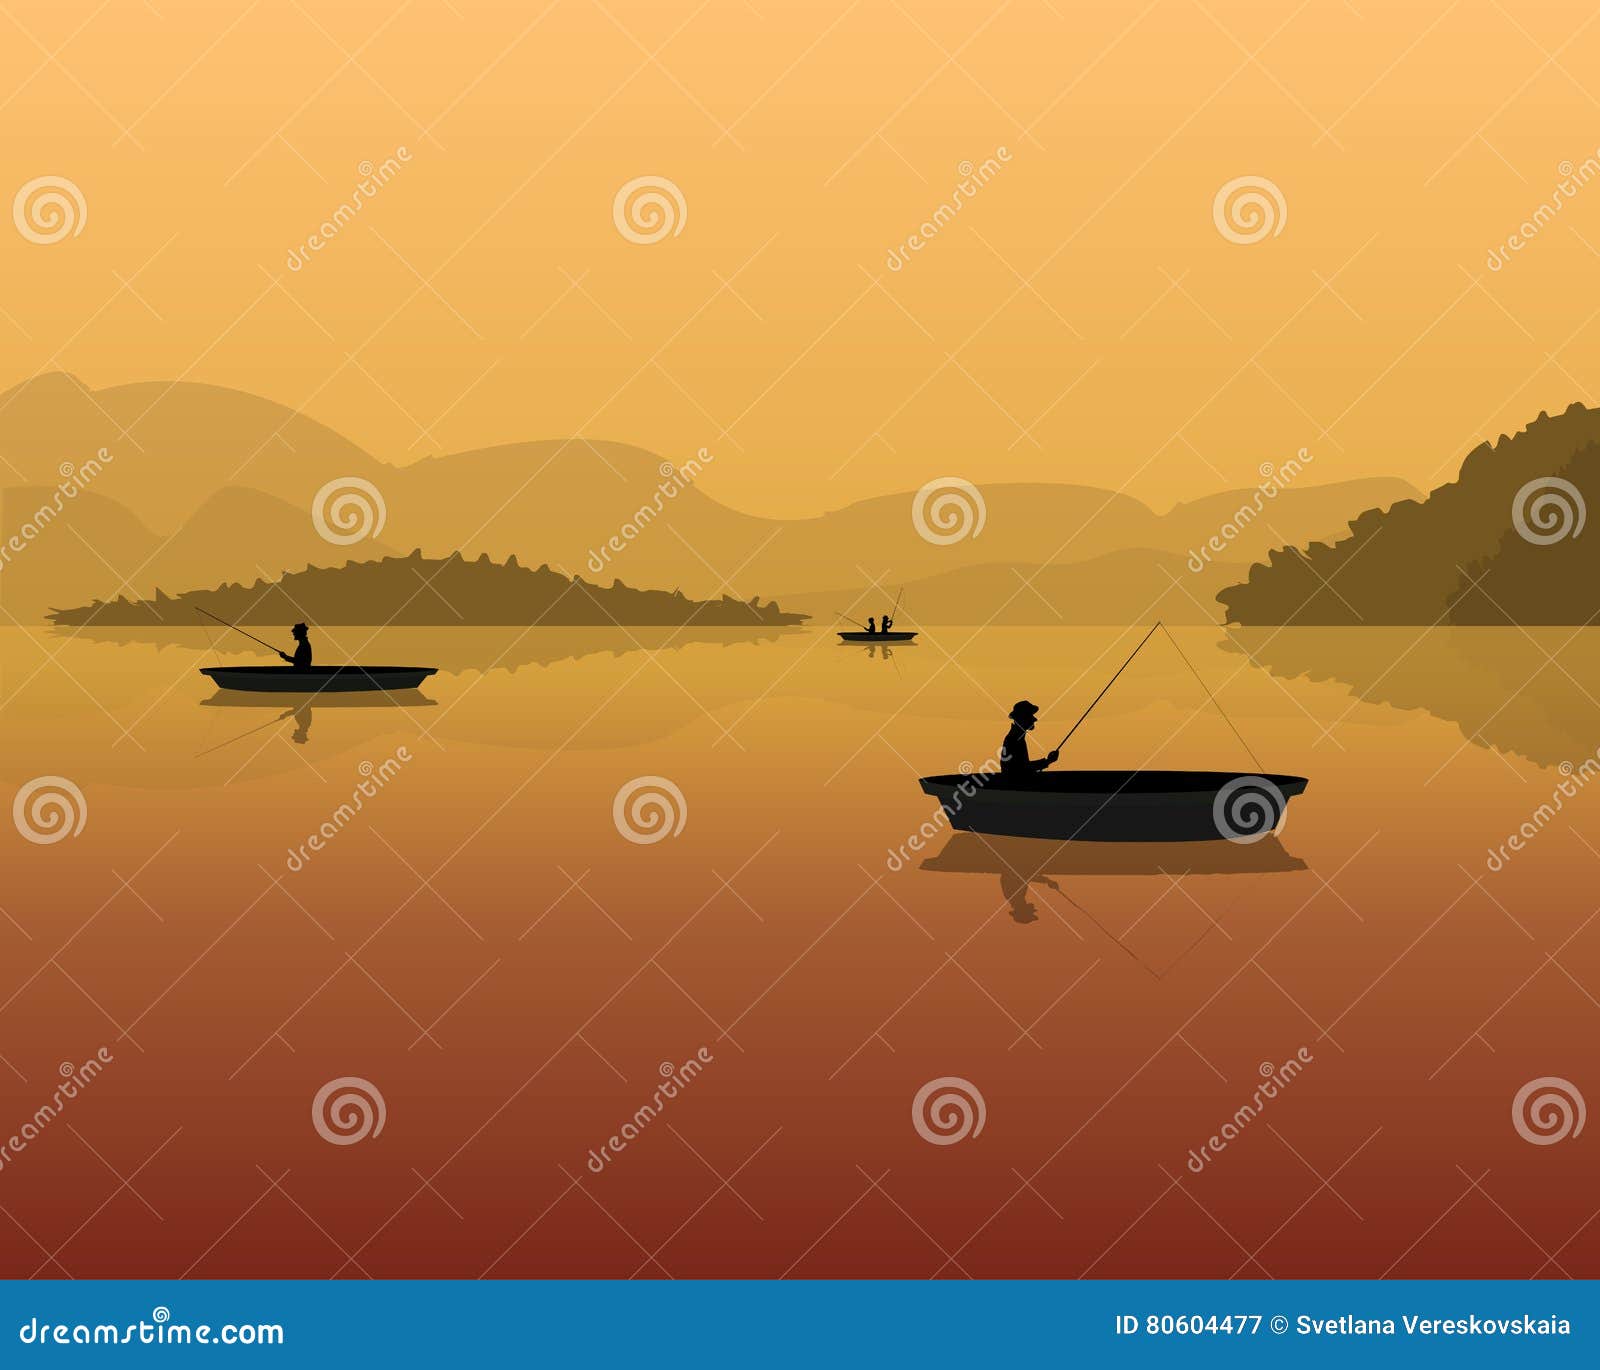 Silhouette of Fishermen in a Boat with Fishing Rods in the Water